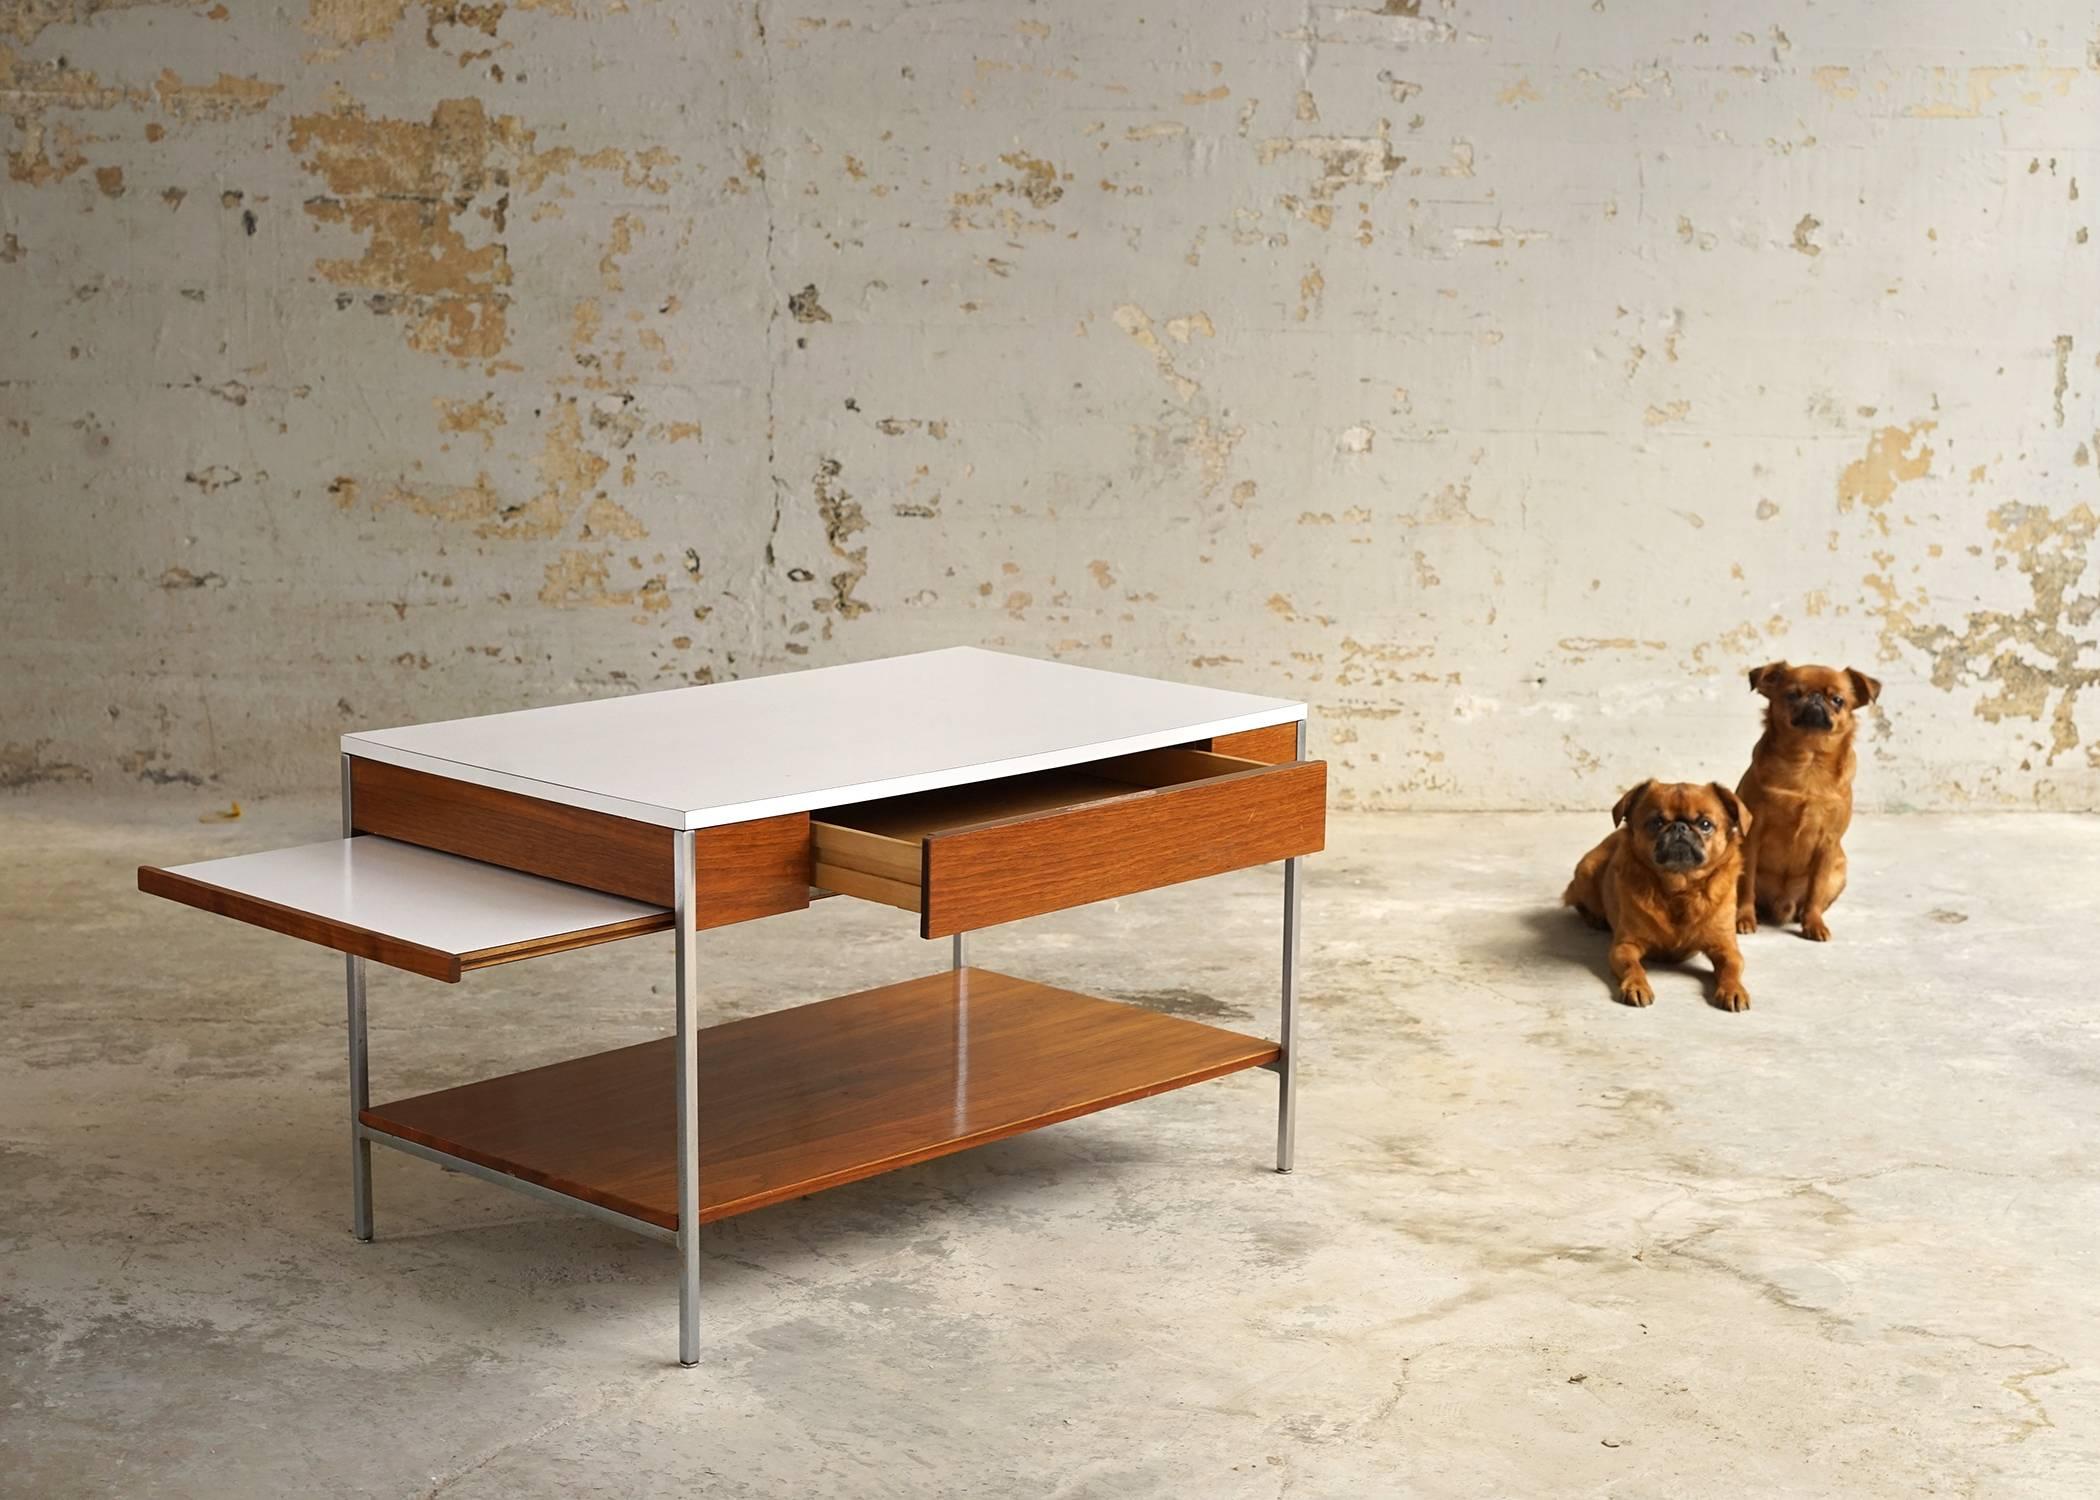 Versatile and multifunctional. Finished back allows table to float in a room if the occasion should require. Richly toned wood contrasts nicely with metal legs and white formica top. Features single drawer and 18.75